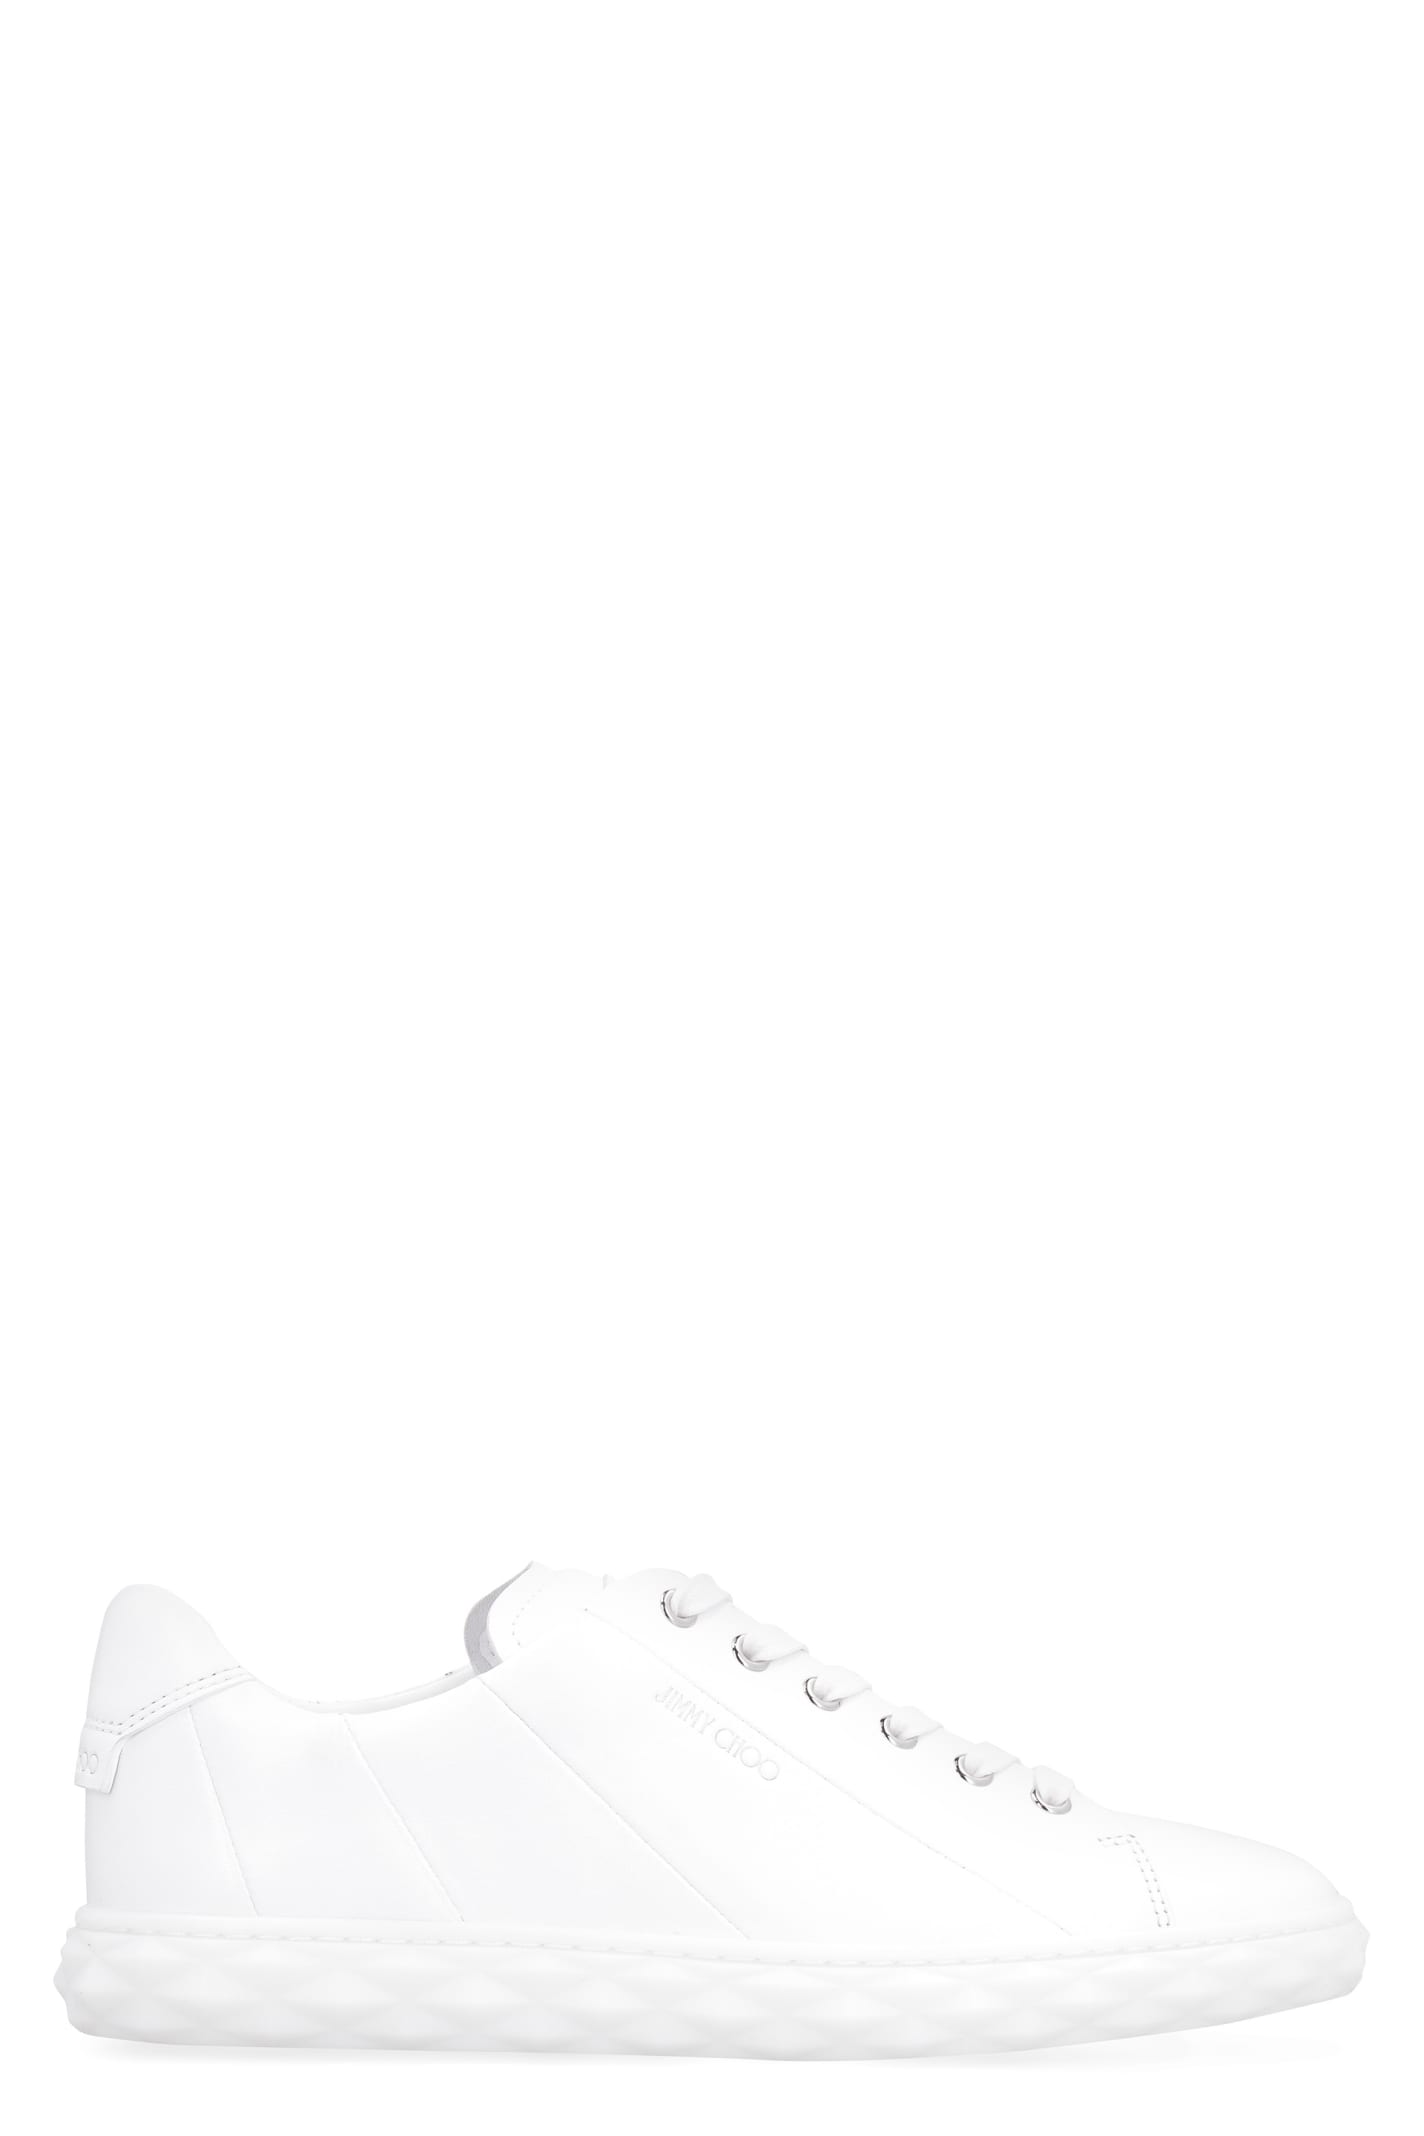 Buy Jimmy Choo Diamond Light Leather Low-top Sneakers online, shop Jimmy Choo shoes with free shipping